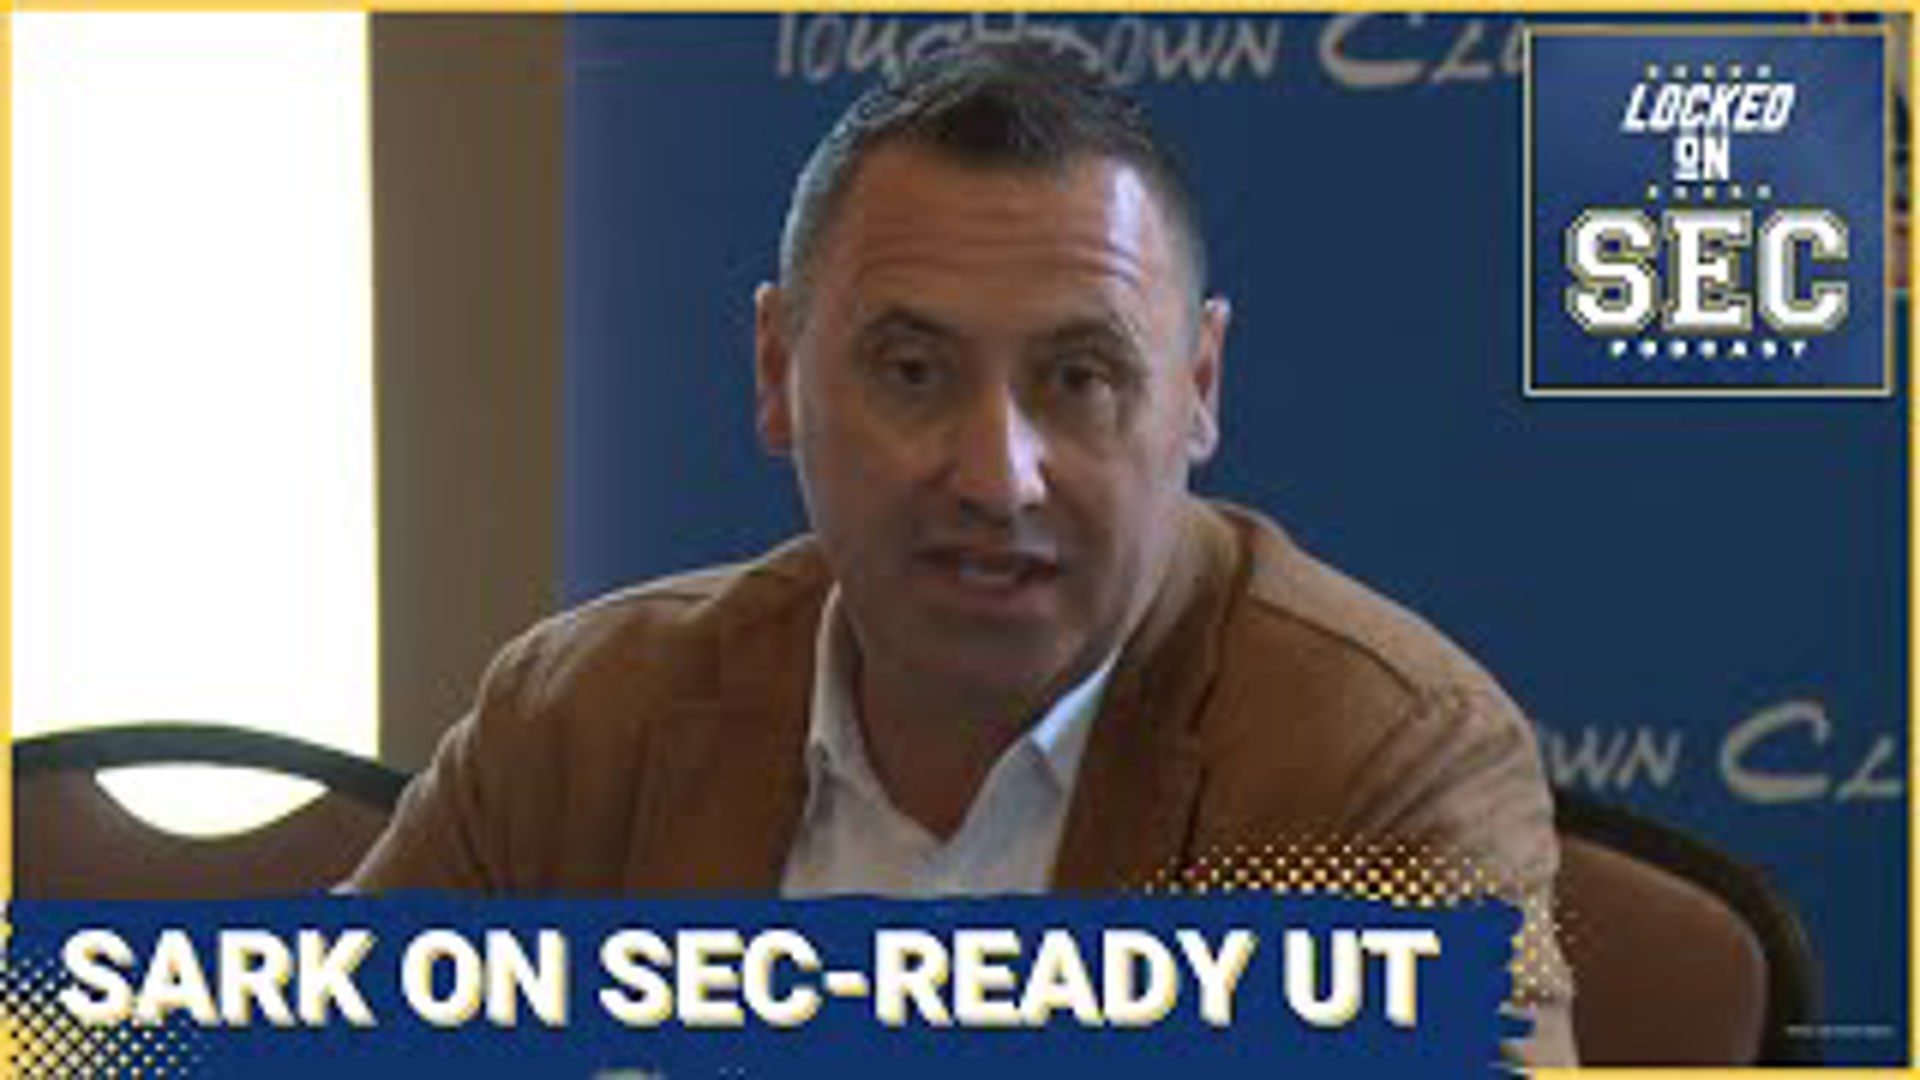 On today's show, we run through ESPN's list of the Most Impactful Newcomers for the Top 25 College Football Teams for 2024 - we pick out the SEC teams they listed.